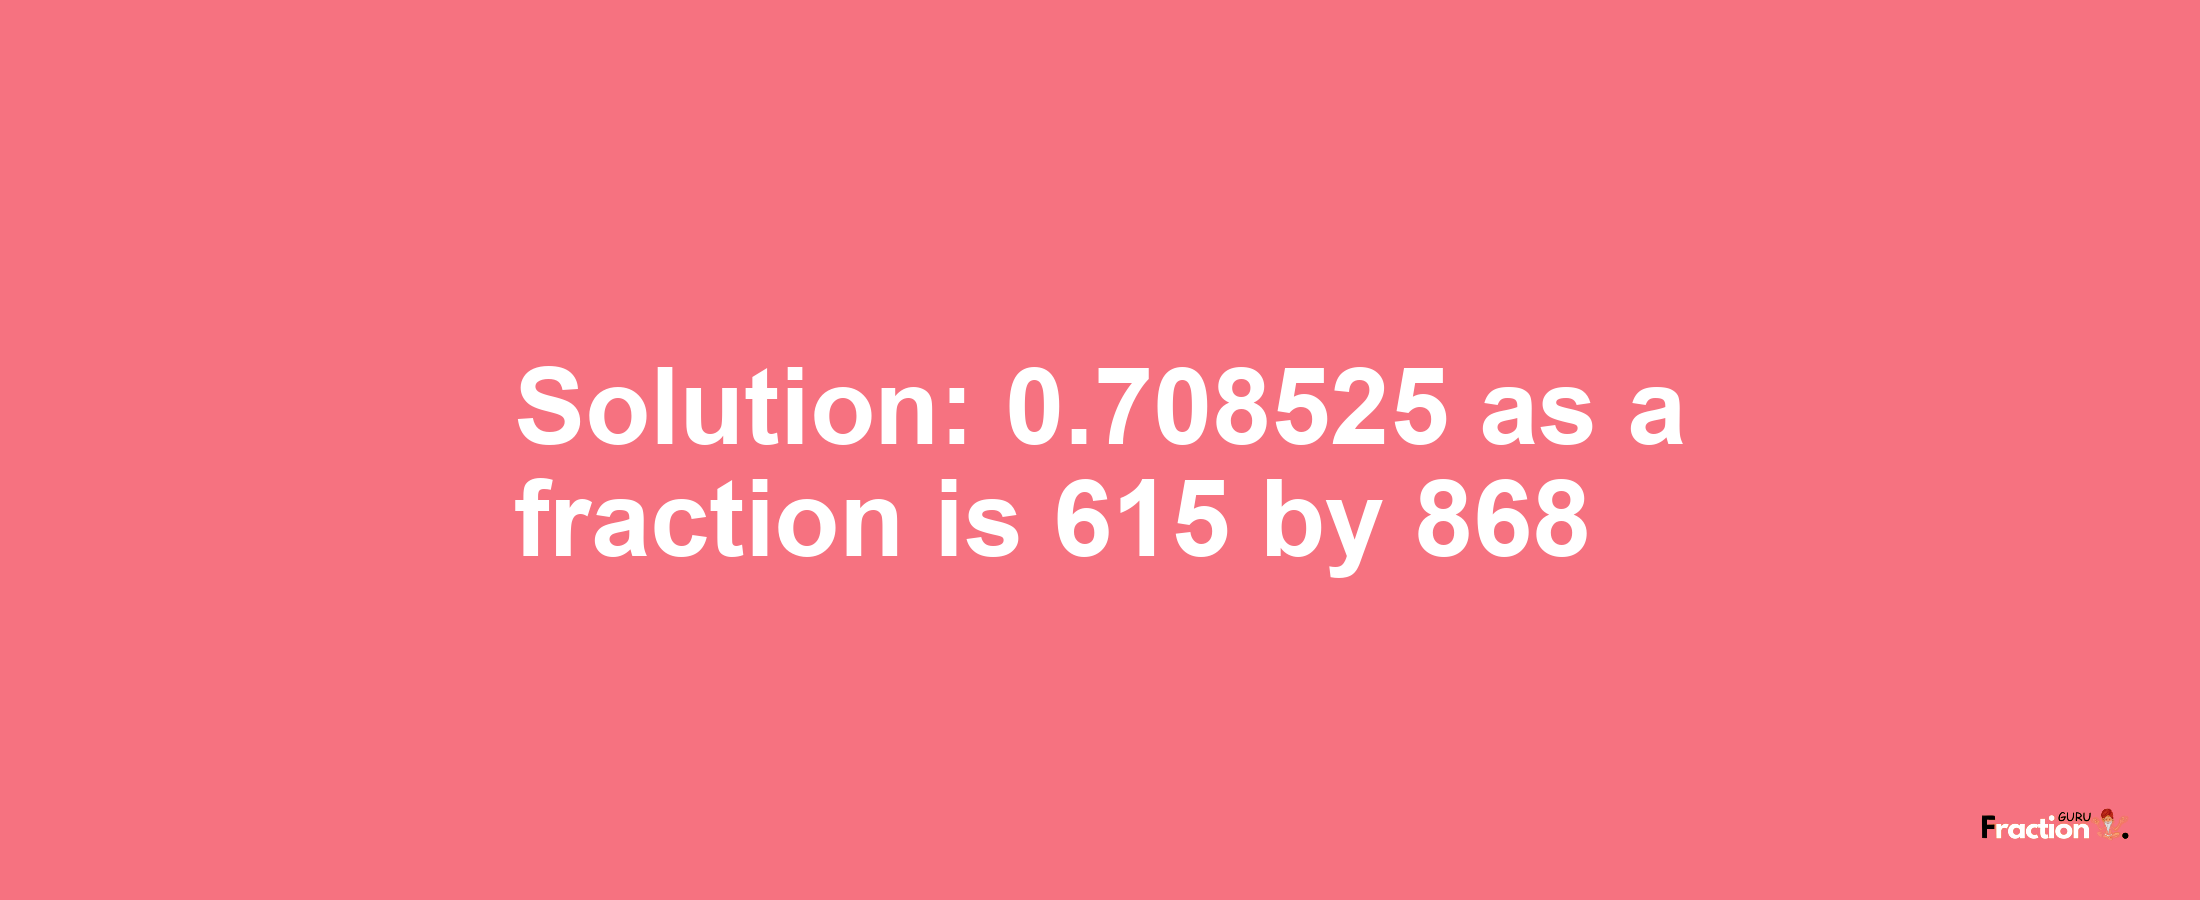 Solution:0.708525 as a fraction is 615/868